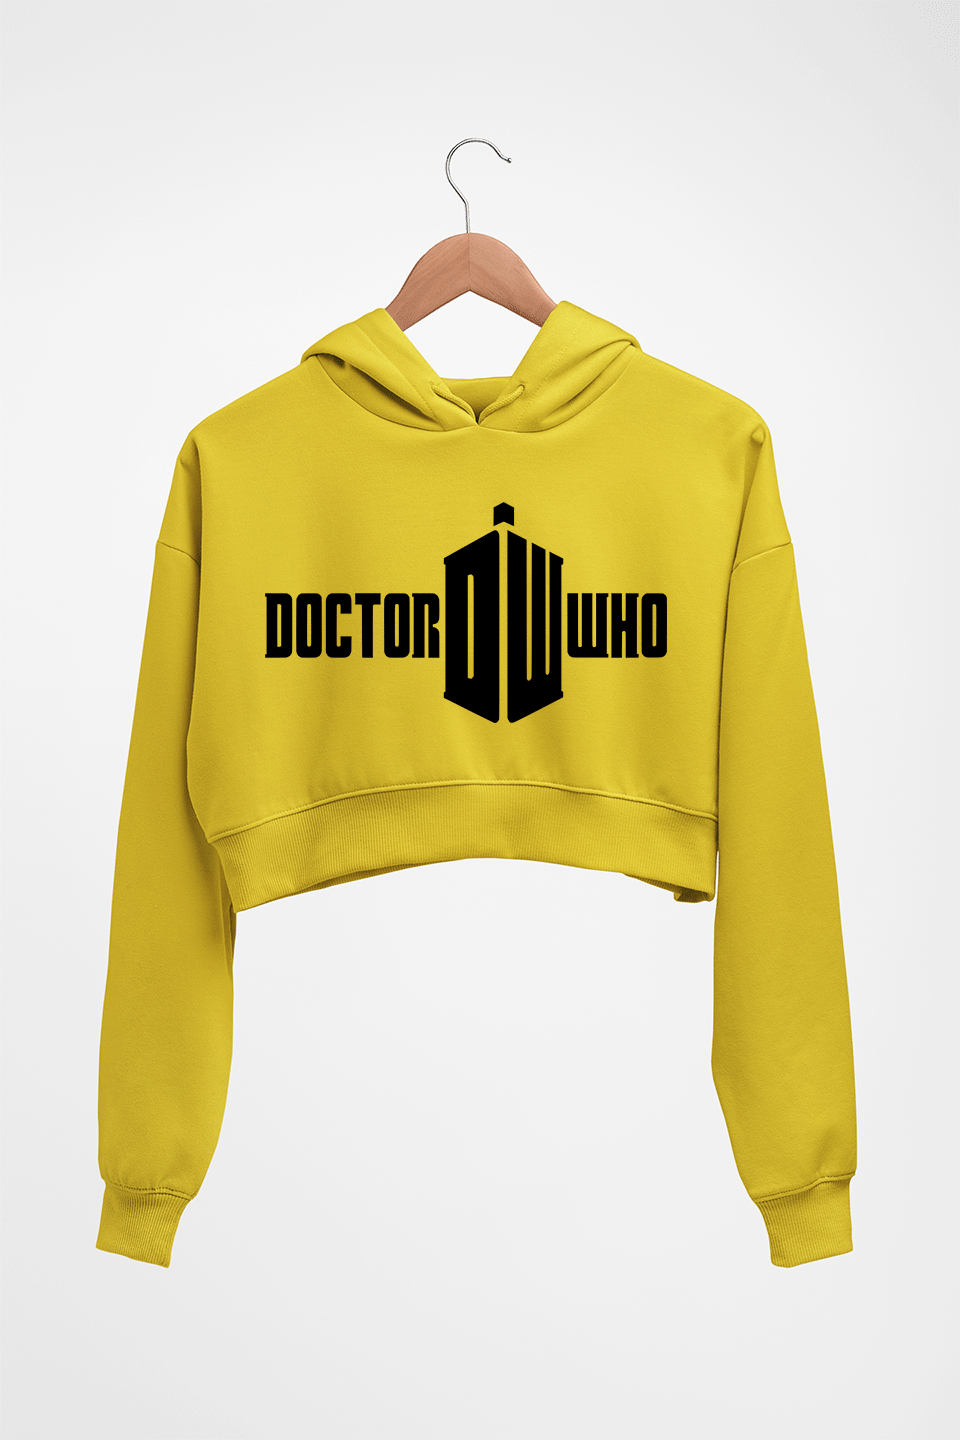 Doctor Who Crop HOODIE FOR WOMEN